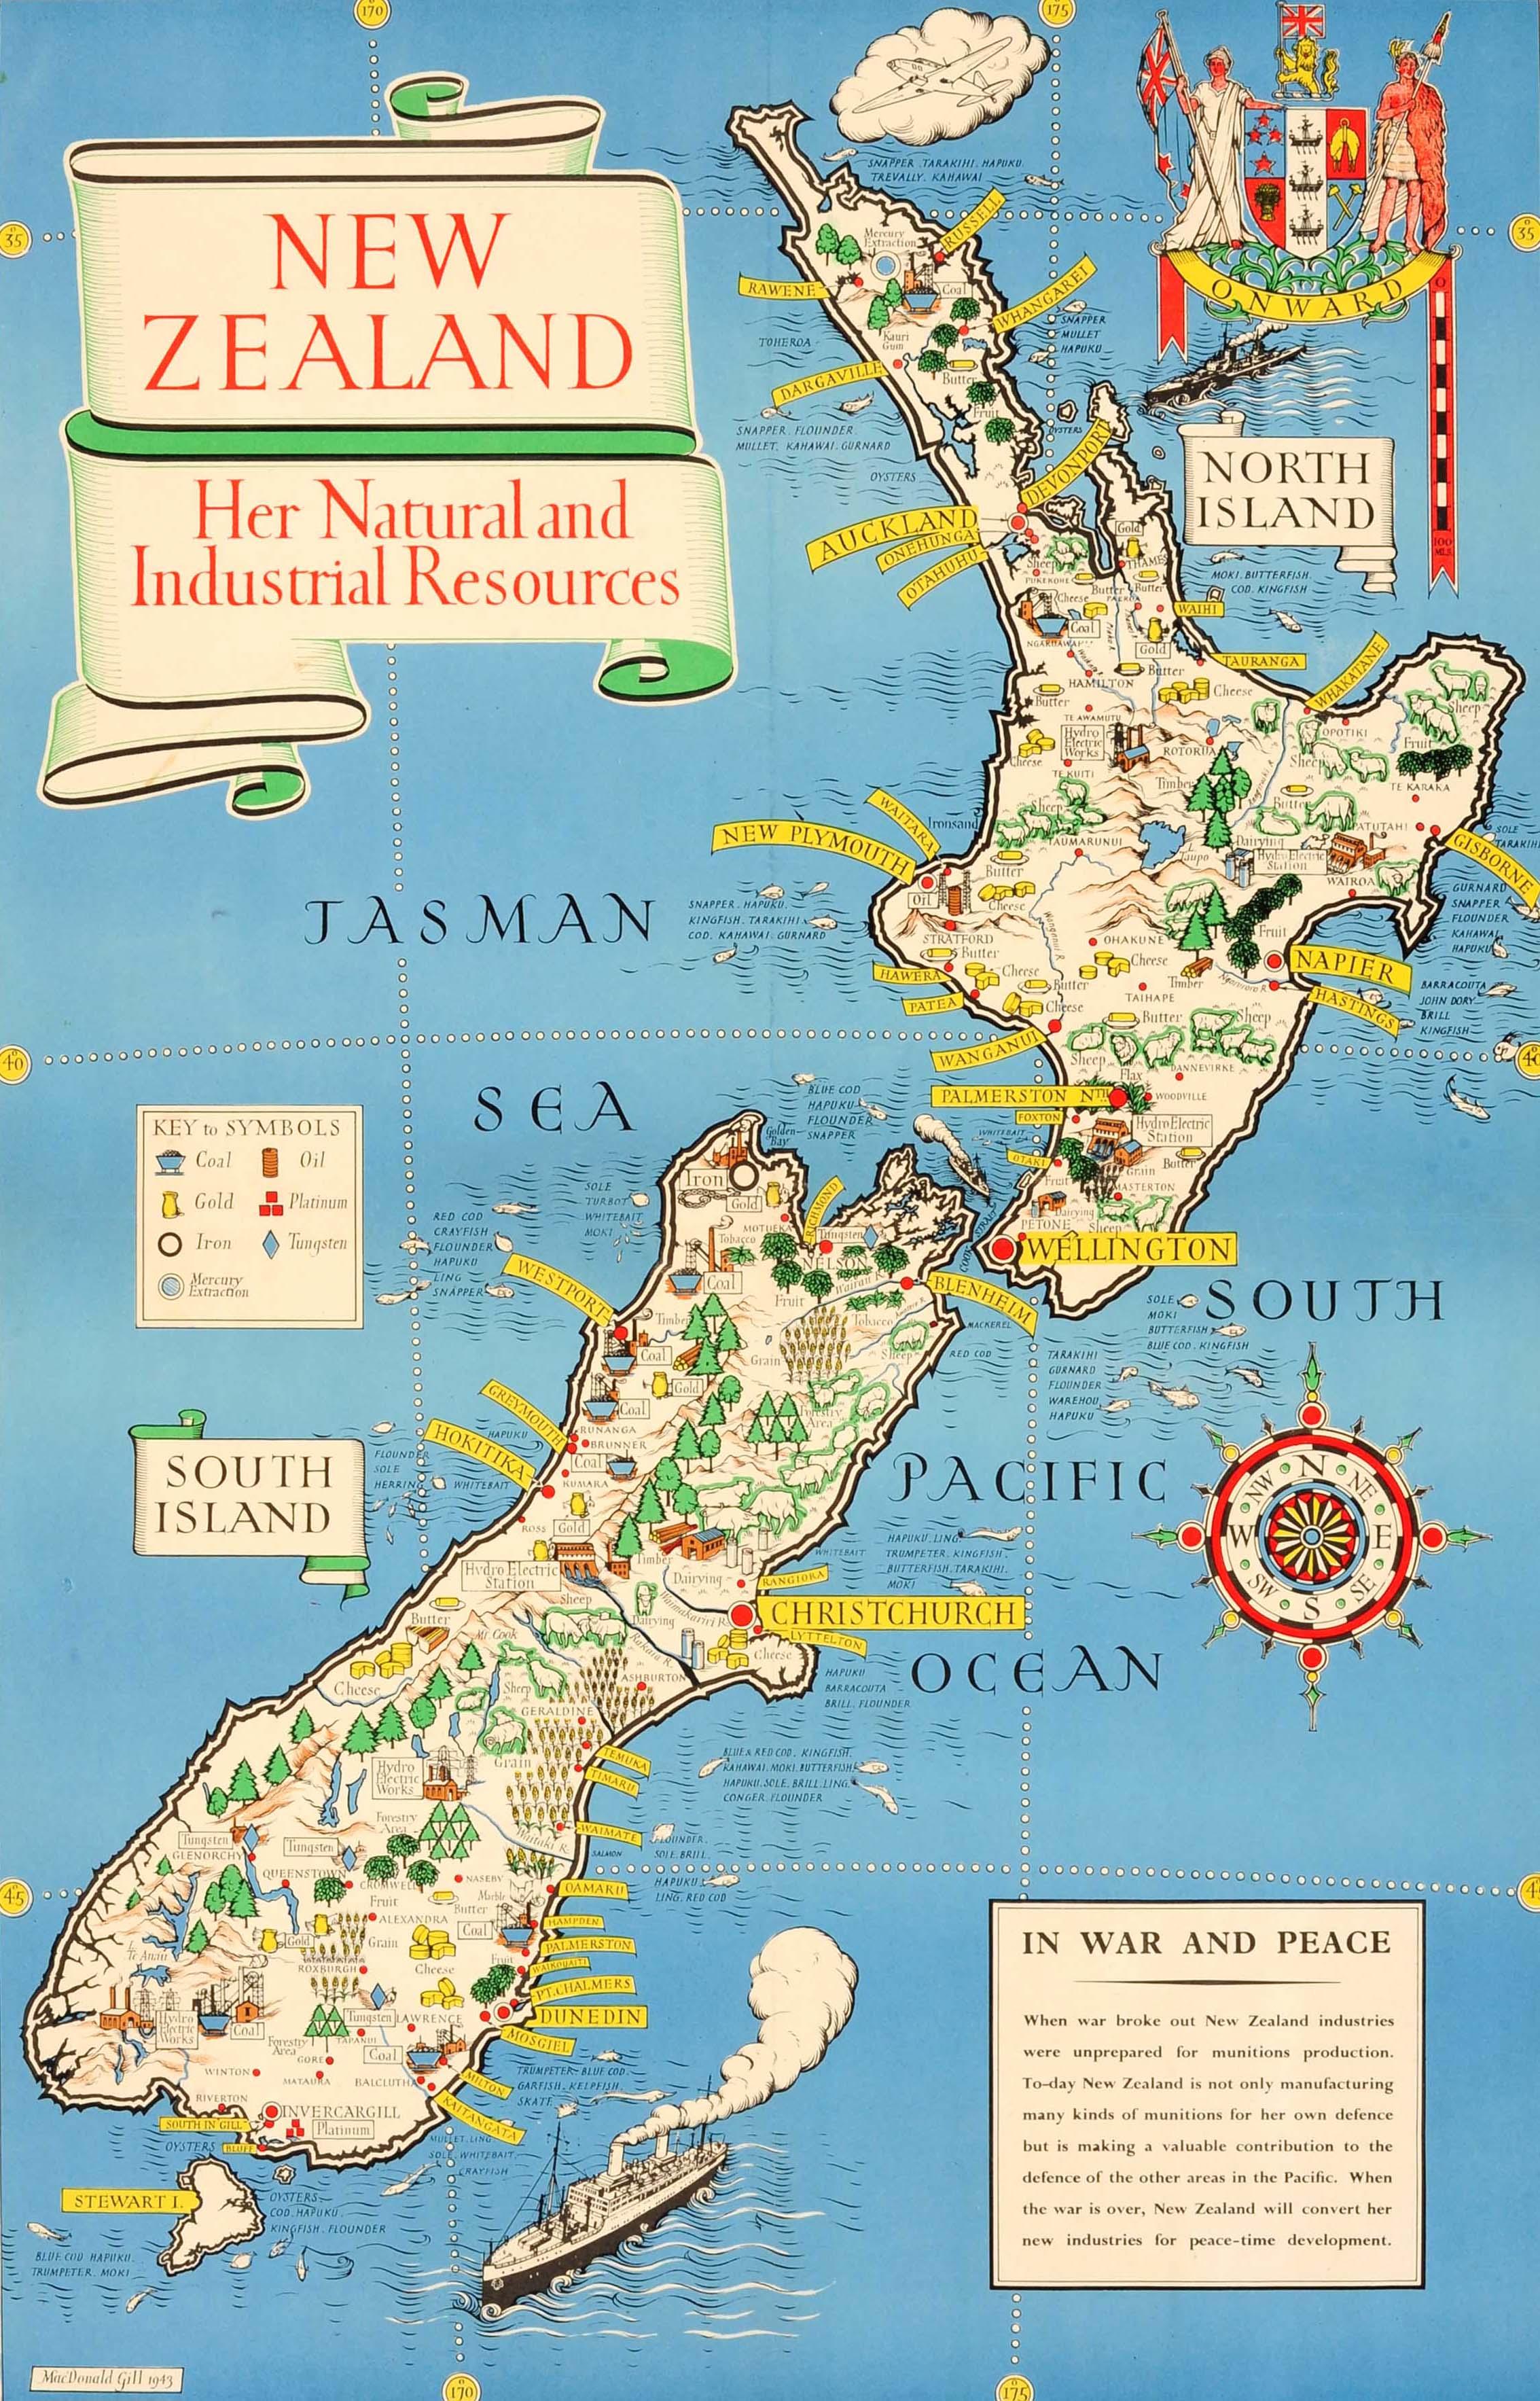 Original vintage World War Two pictorial map for New Zealand her natural and Industrial resources featuring a great illustration by the notable graphic designer, cartographer and artist MacDonald Gill (Leslie MacDonald Gill aka Max Gill; 1884-1947)